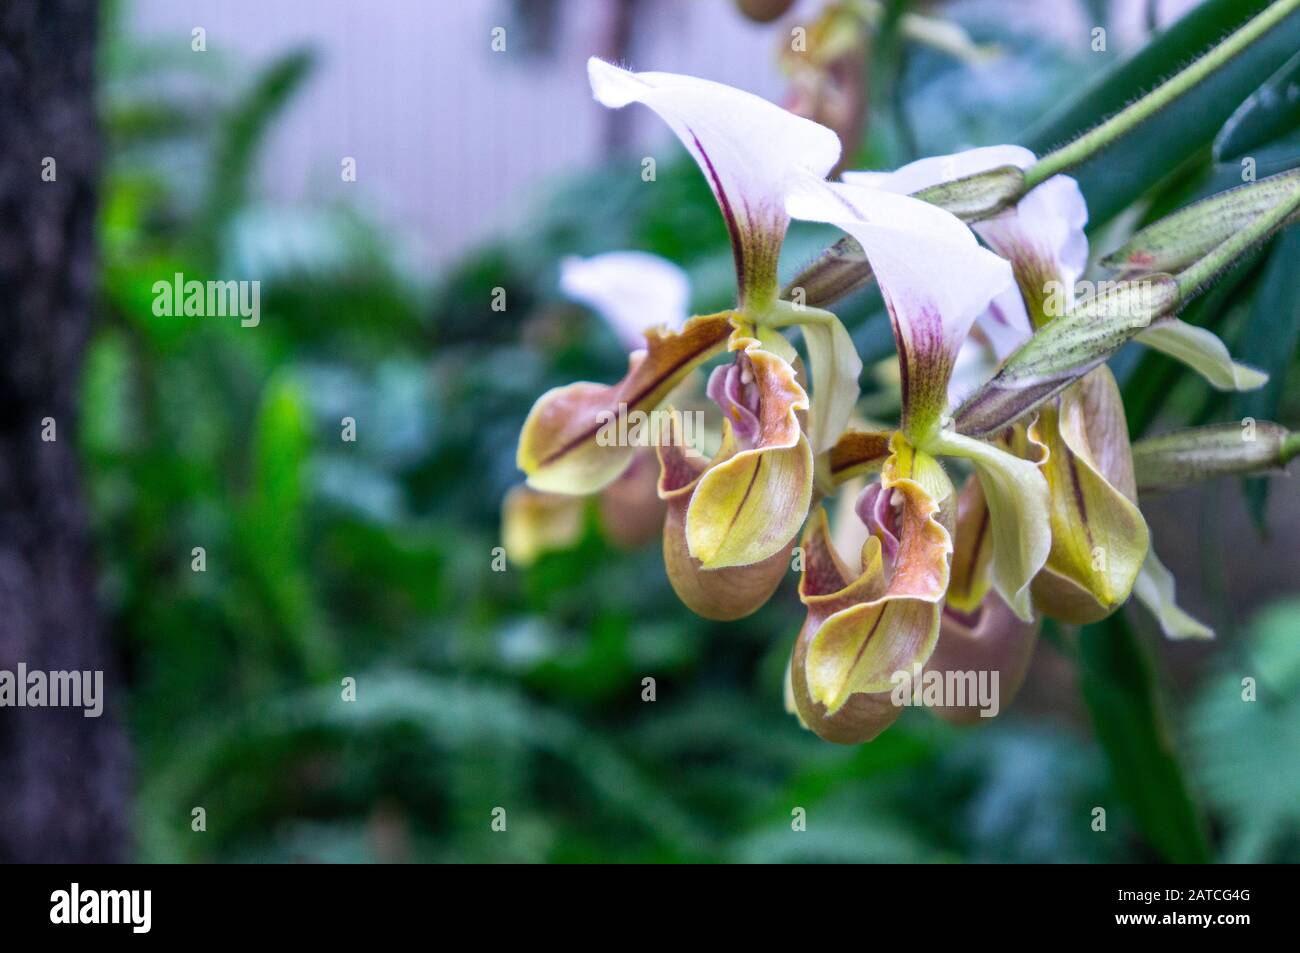 Group of yellow and purple Venus slipper orchid flowers in bloom in macro. Blurred background of jungle theme shot in daylight at botanical gardens Stock Photo